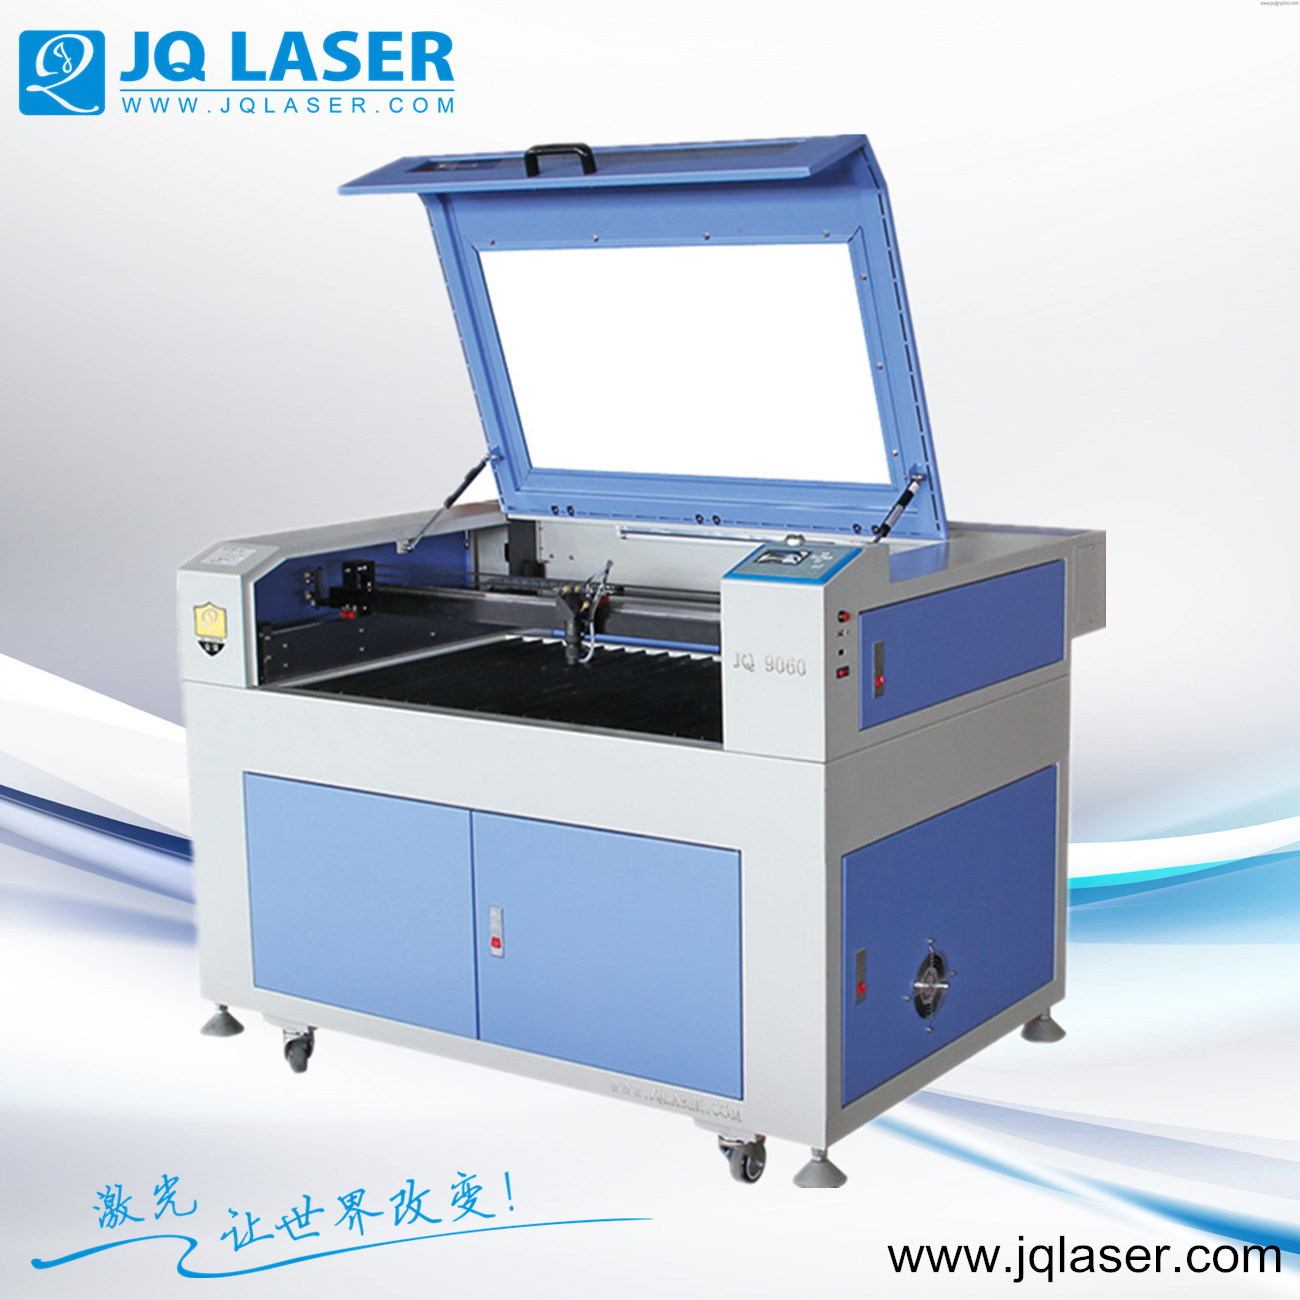 CNC Small Wooden Engraving Machine with CO2 Laser